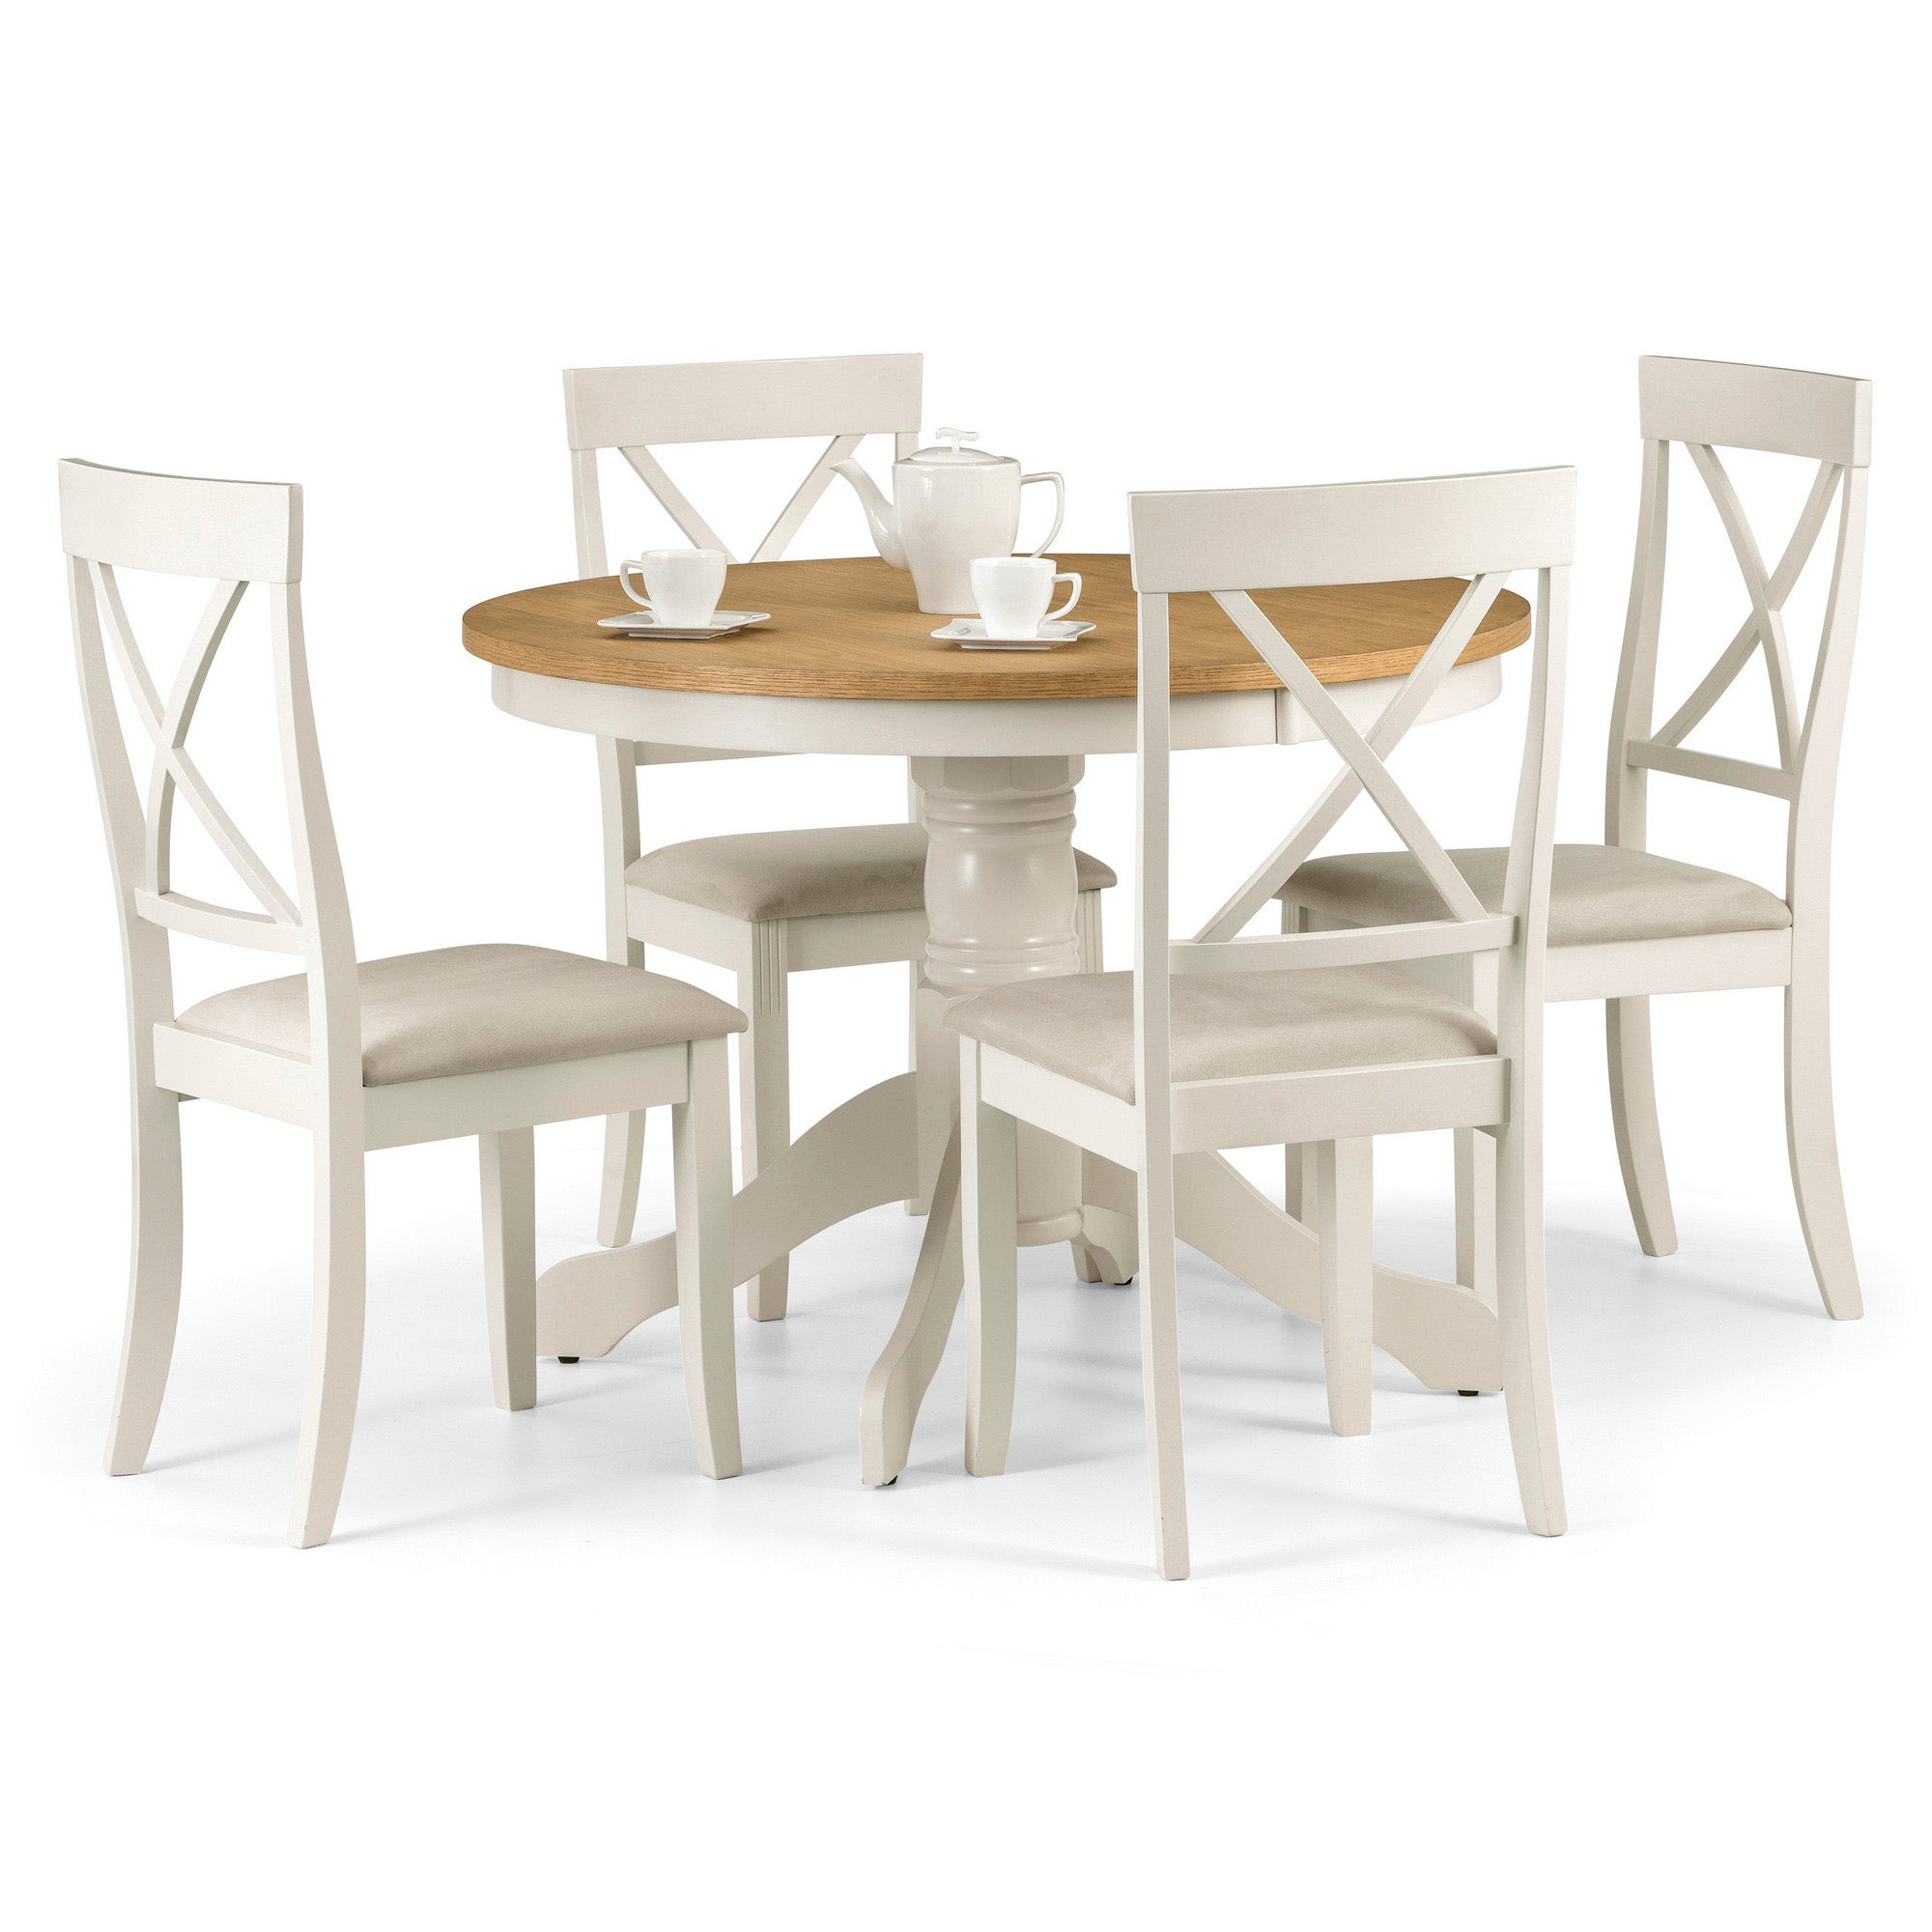 Davenport Round Dining Table with 4 Chairs Cream